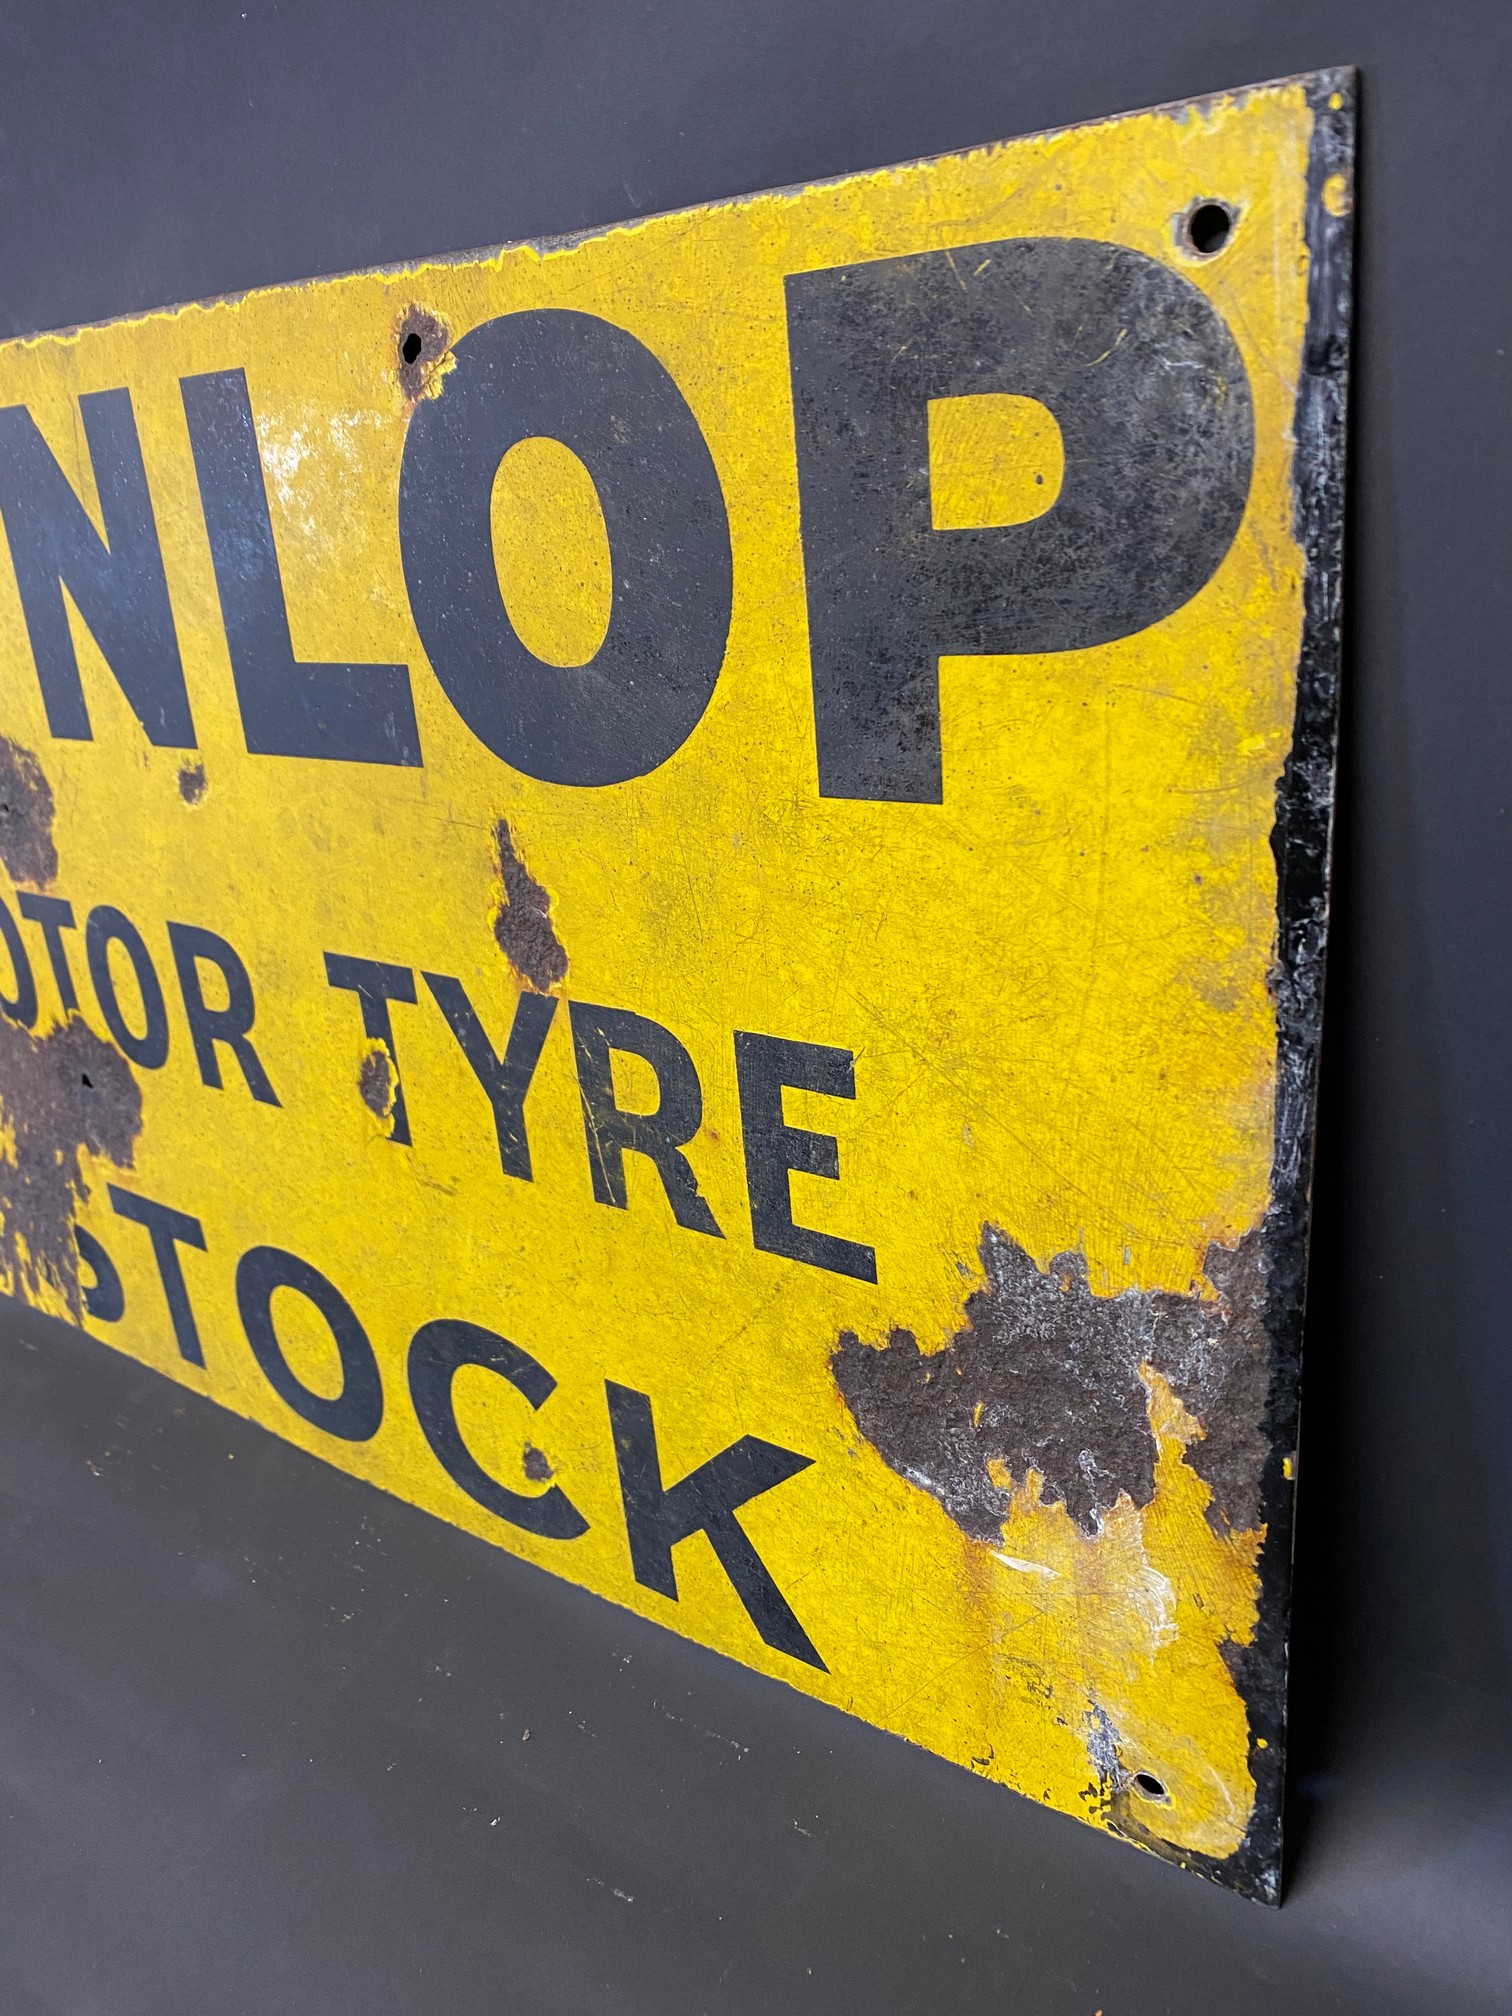 An early Dunlop Motor Tyre Stock rectangular double sided enamel sign, lacking hanging flange and - Image 4 of 4